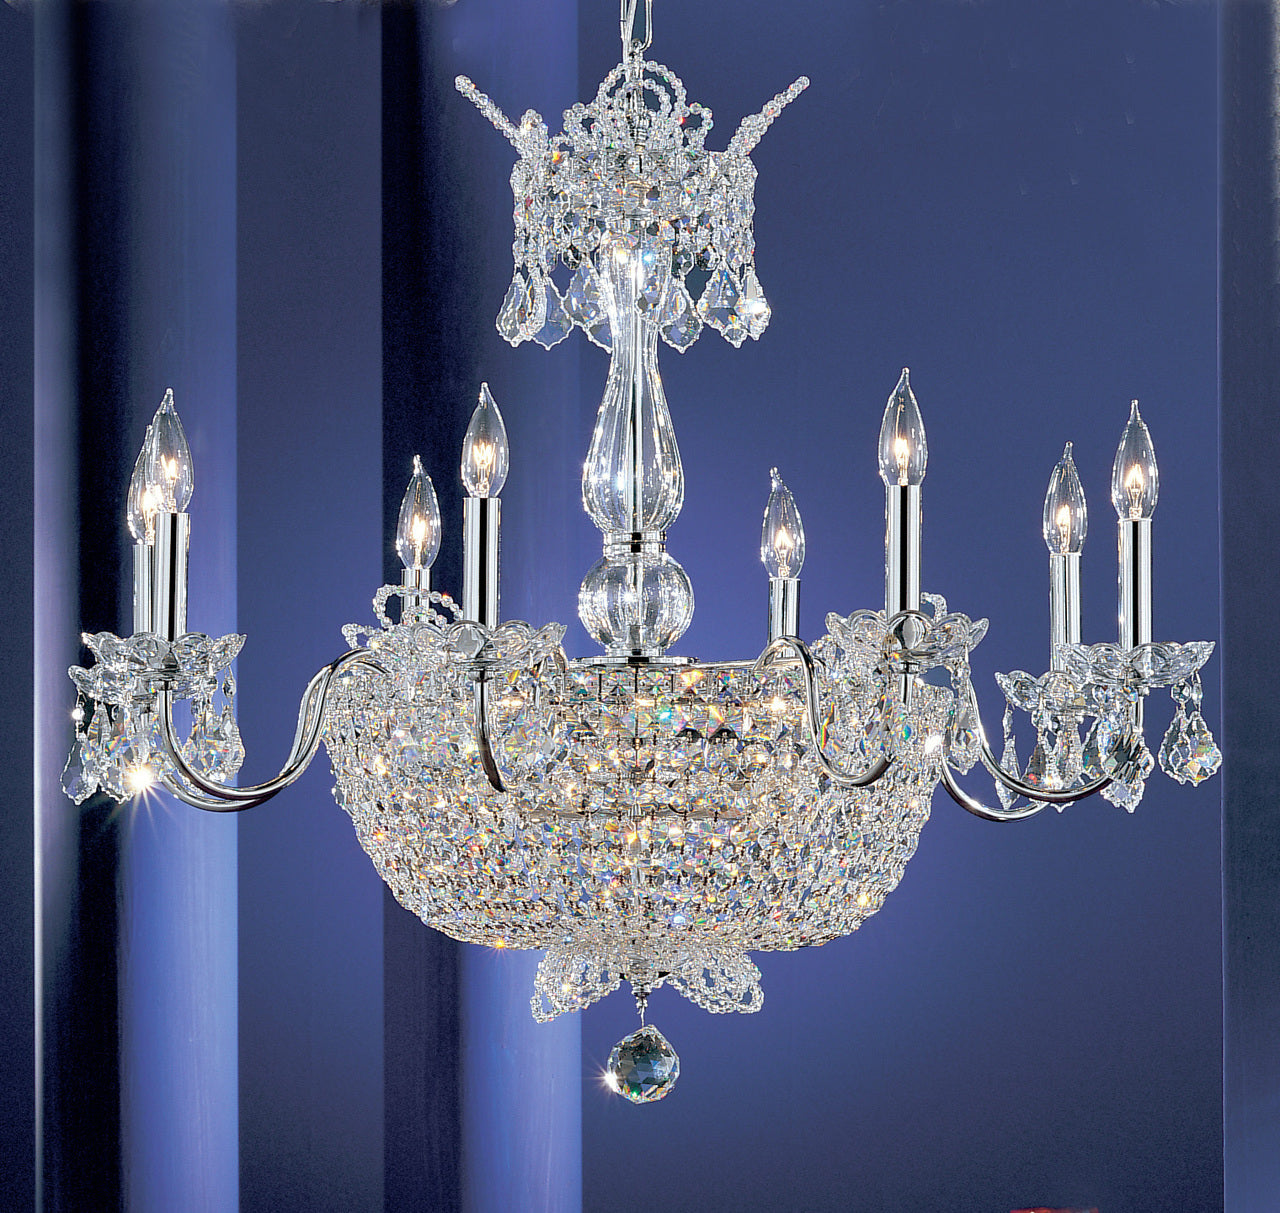 Classic Lighting 69788 CH S Crown Jewels Crystal Chandelier in Chrome